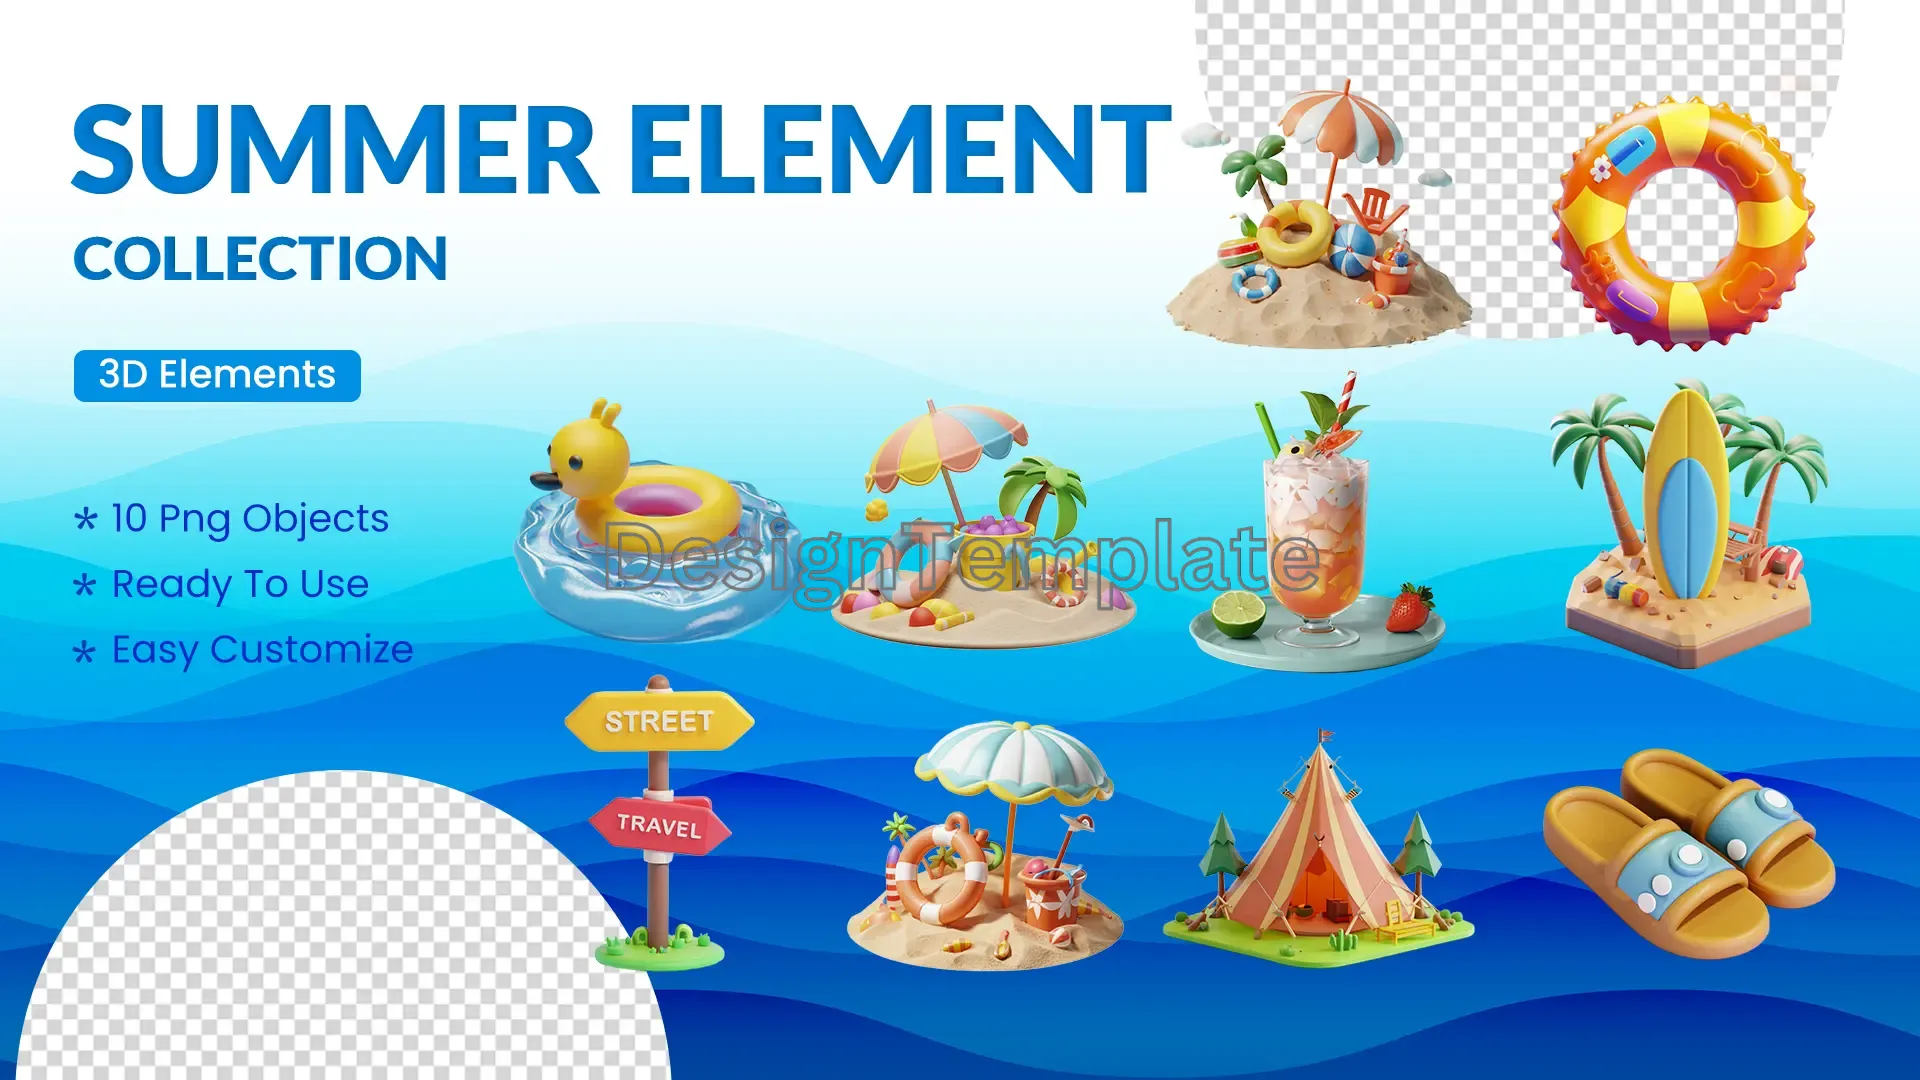 Holiday Essentials Vibrant Summer 3D Pack image